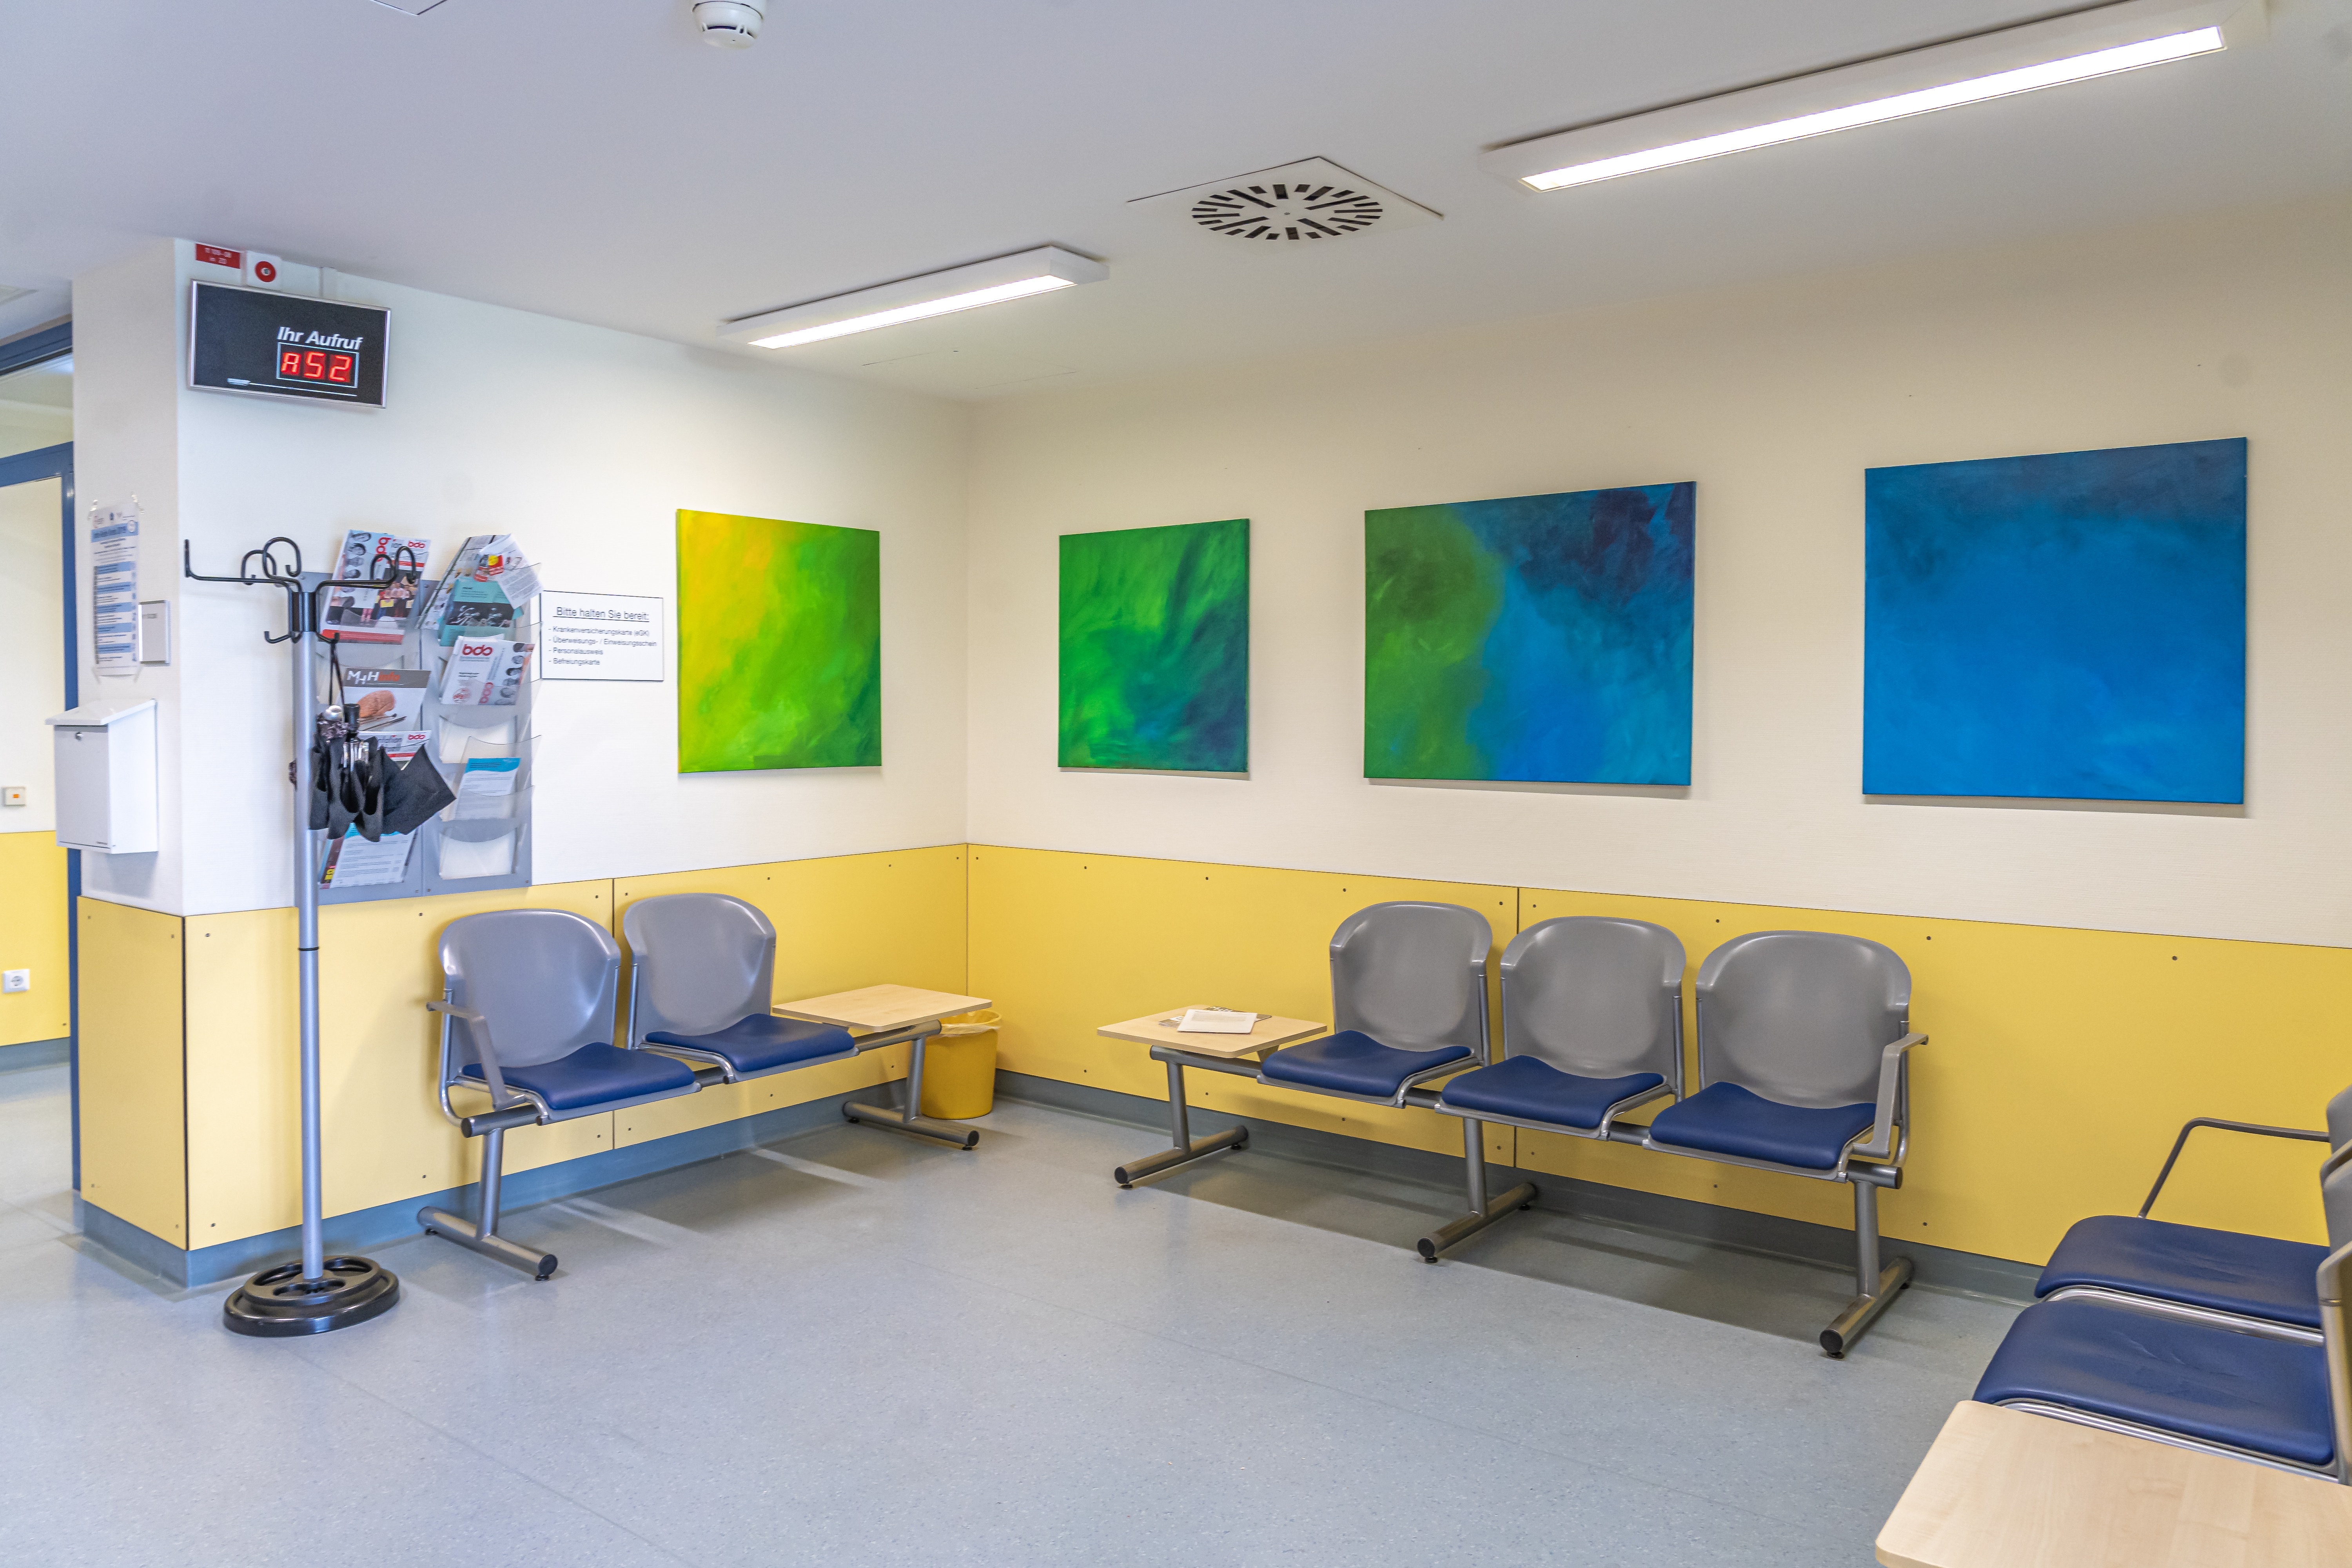 Our outpatient clinic of VCH with several seats and colorful pictures on the wall